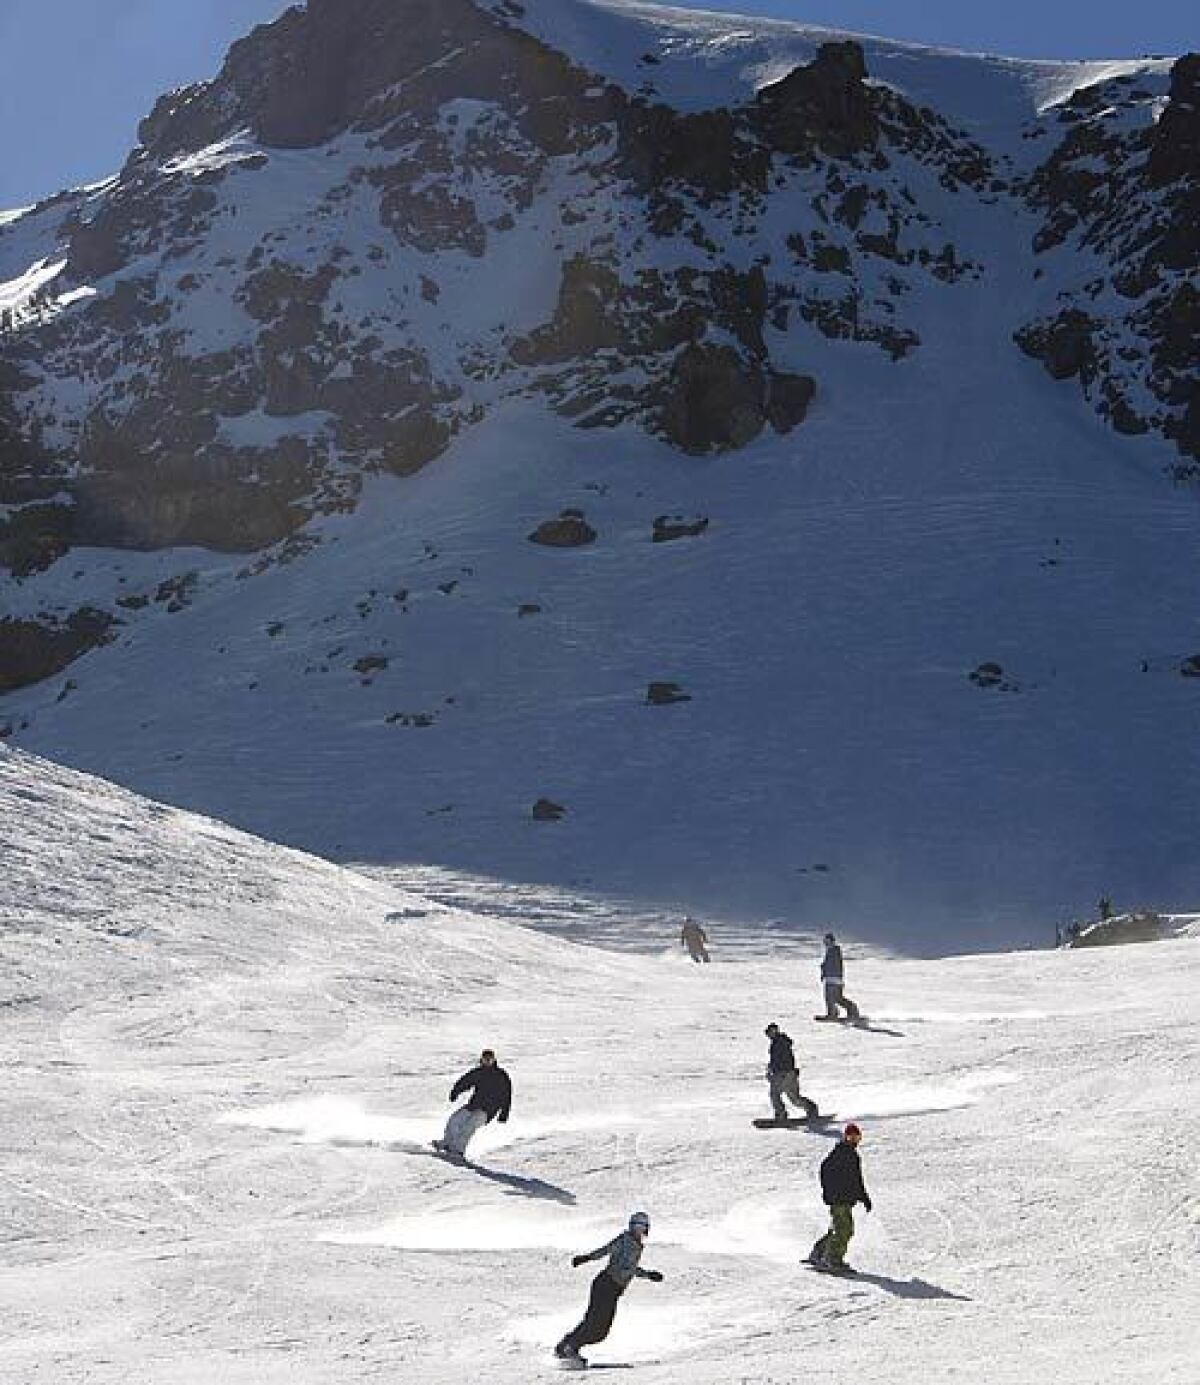 Snowboarders take on the slopes at Mammoth.